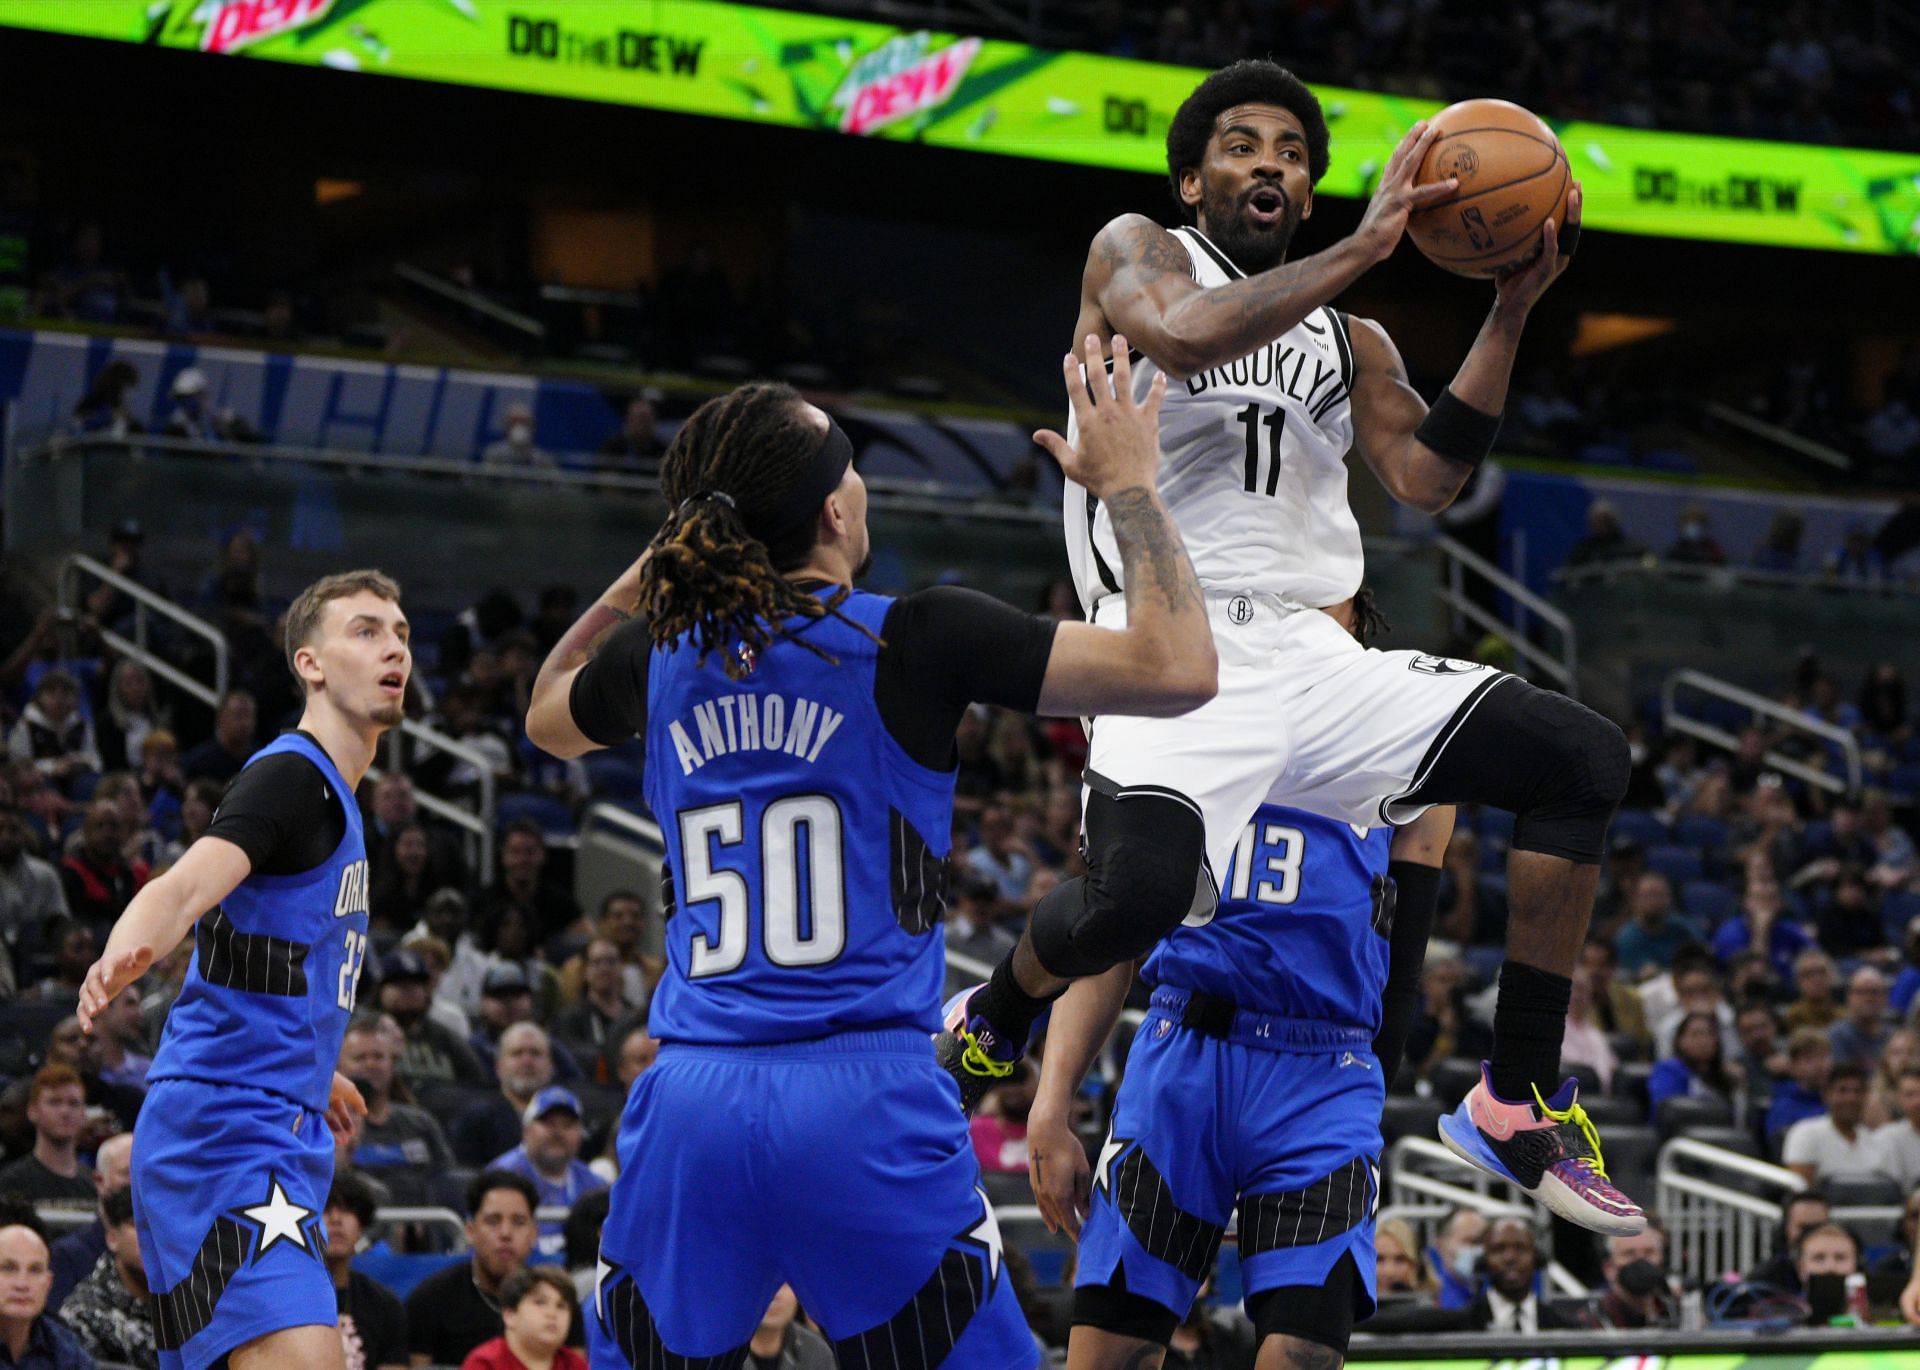 Kyrie Irving of the Brooklyn Nets drives against the Orlando Magic on March 15 in Orlando, Florida.